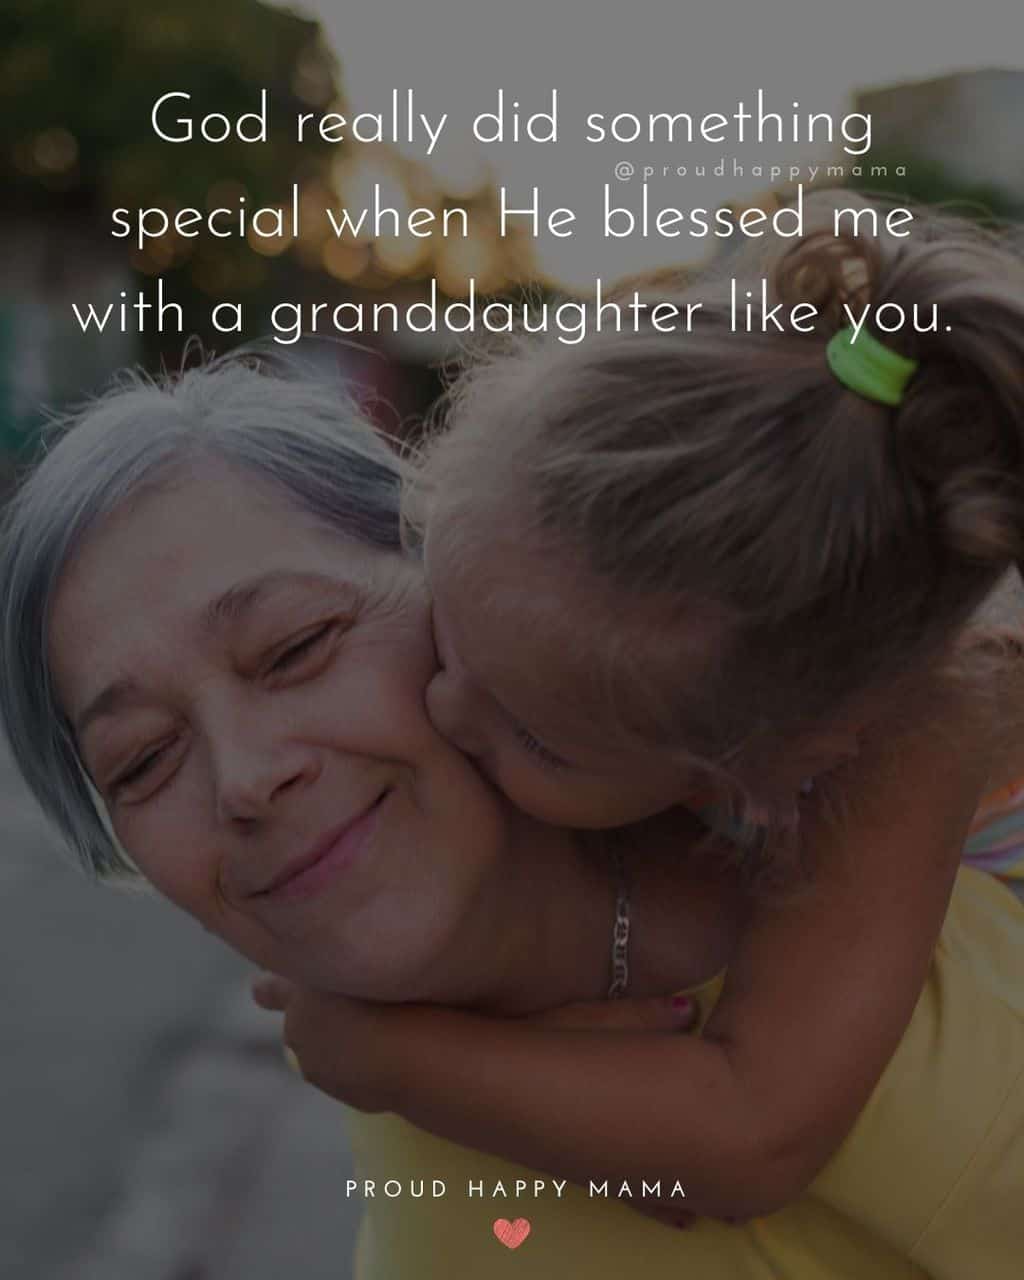 Granddaughter Quotes - God really did something special when He blessed me with a granddaughter like you.’